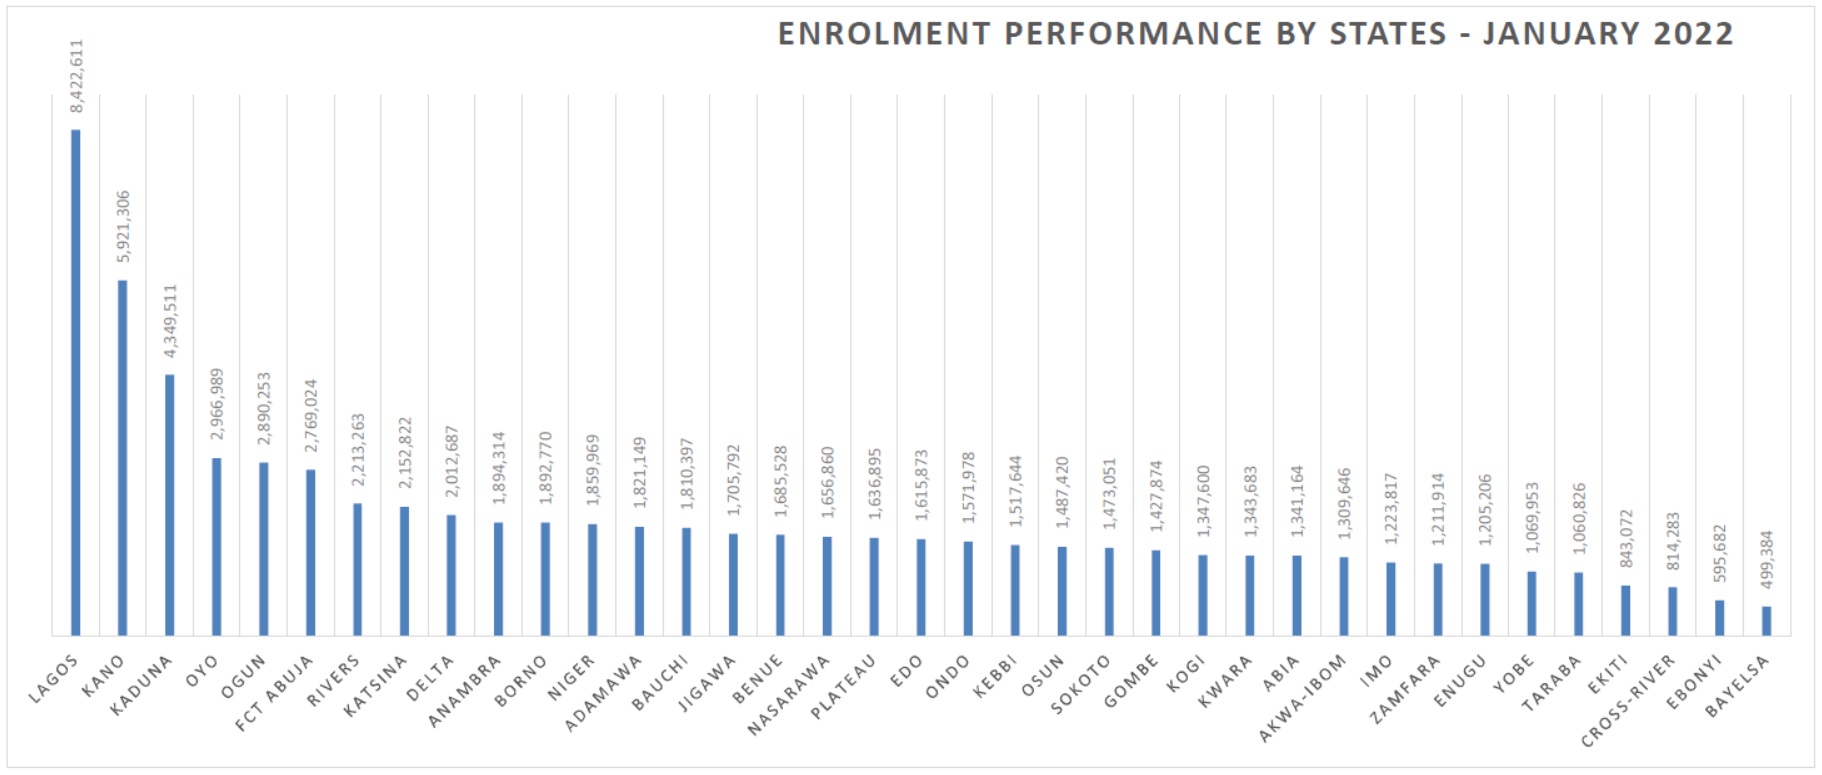 Enrolment Performance by States as at January 1, 2022